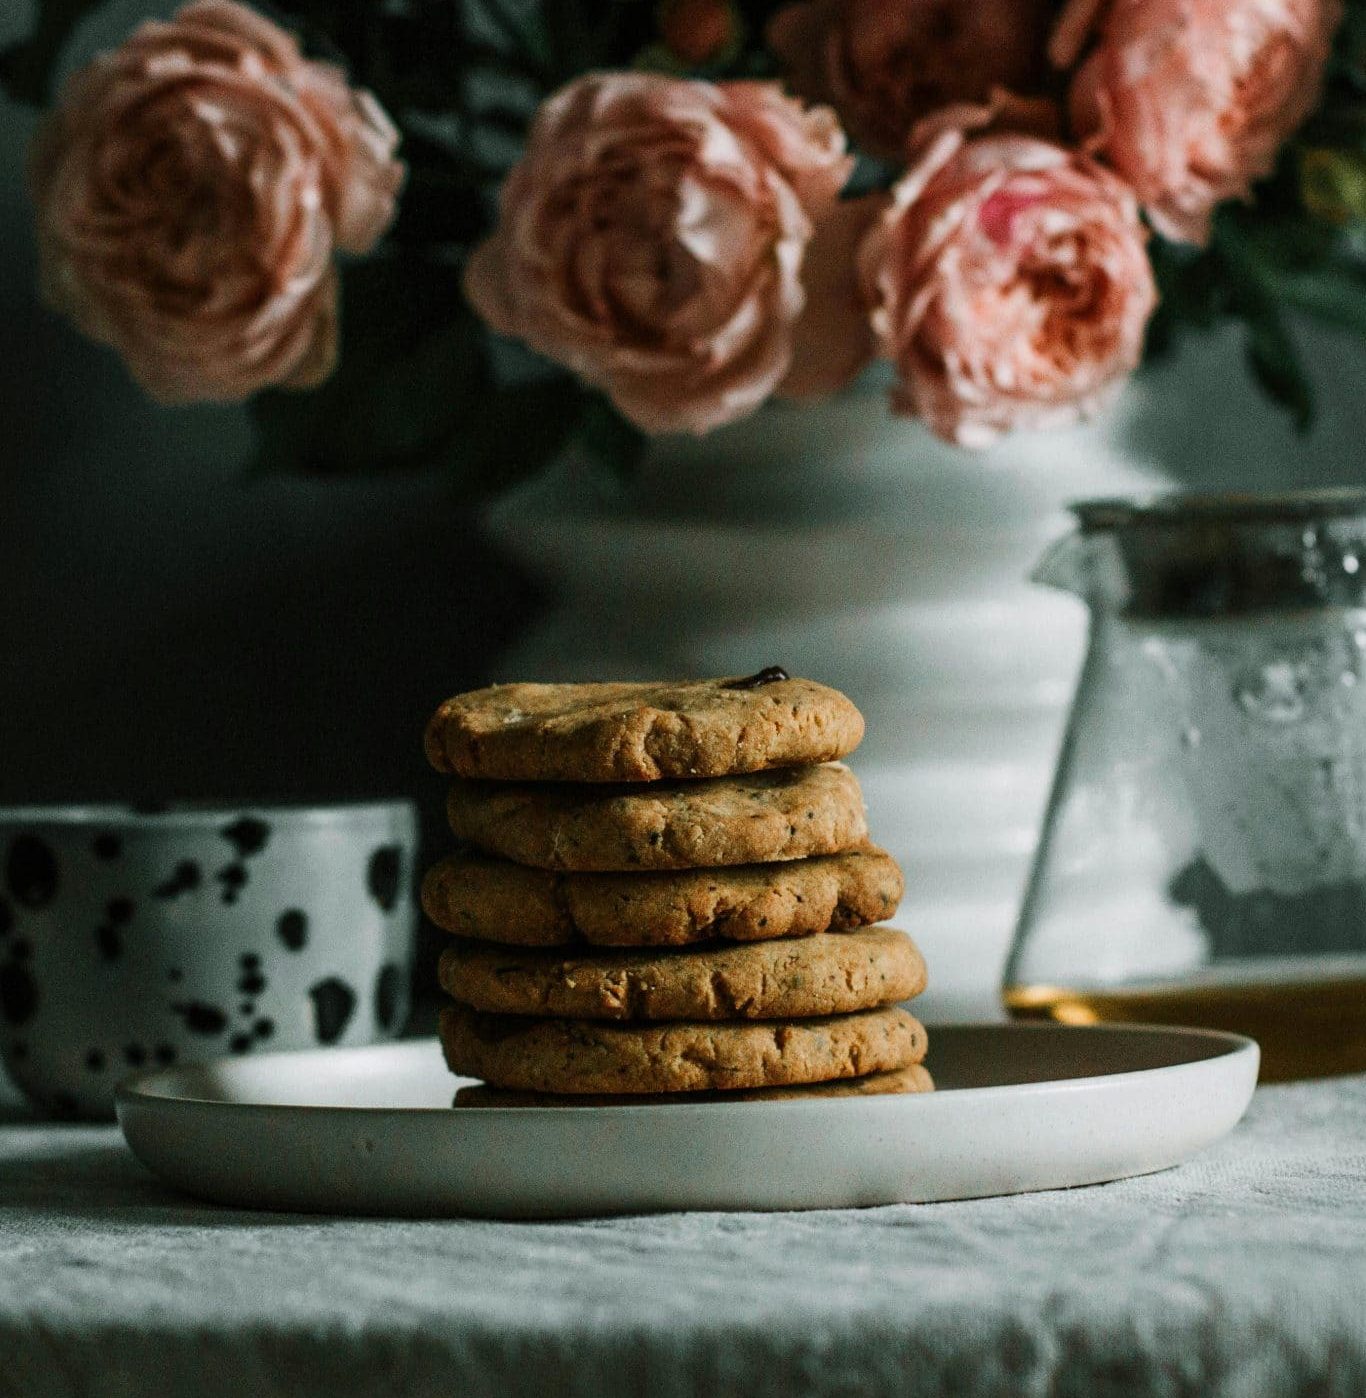 A plate of cookies stacked up on a blue table cloth with flowers behind